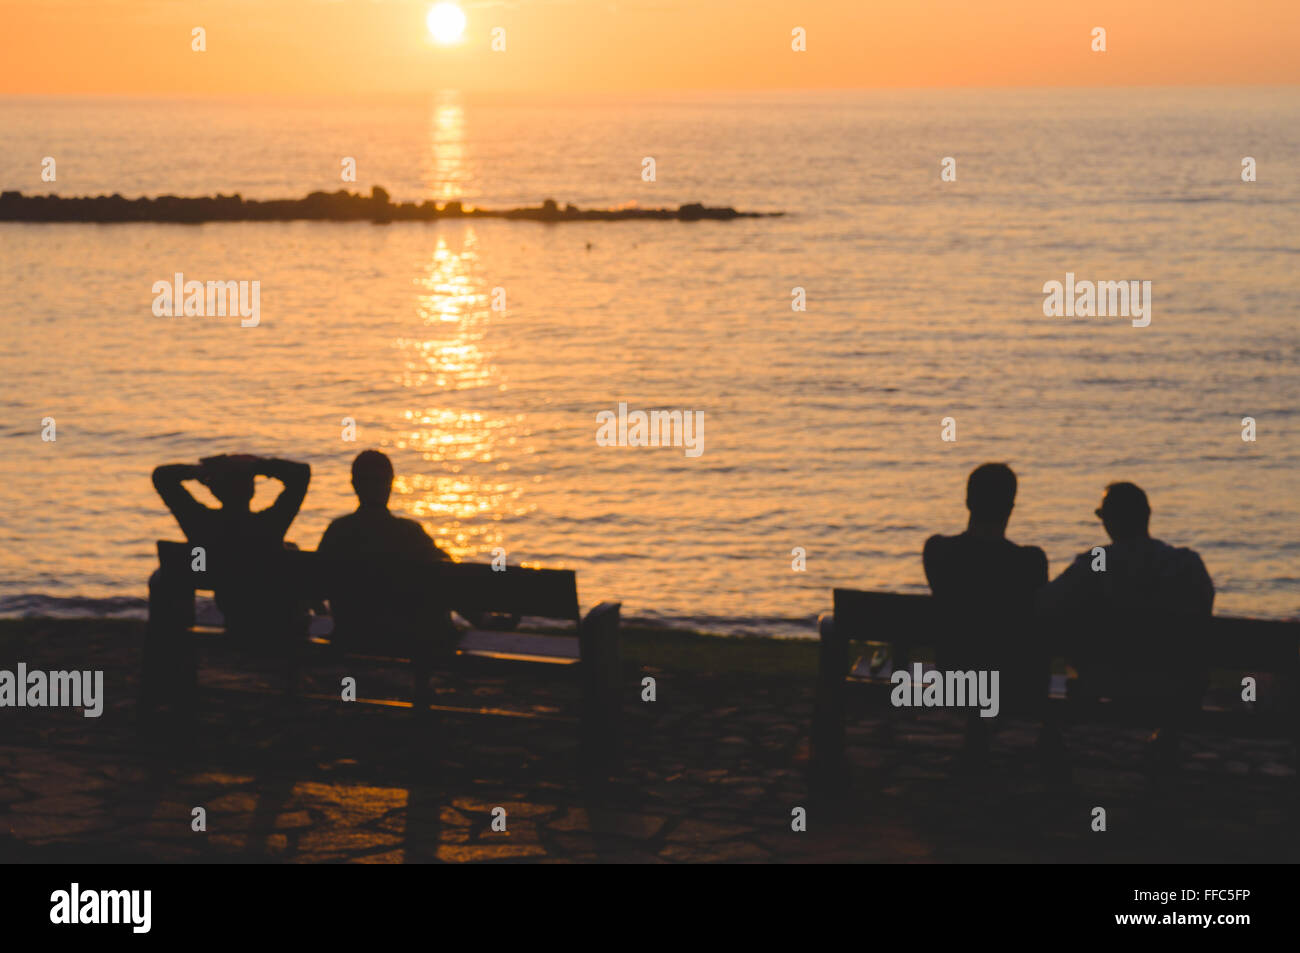 Silhouette of people sitting on bench and enjoying sunset, blurred image with matt toning Stock Photo